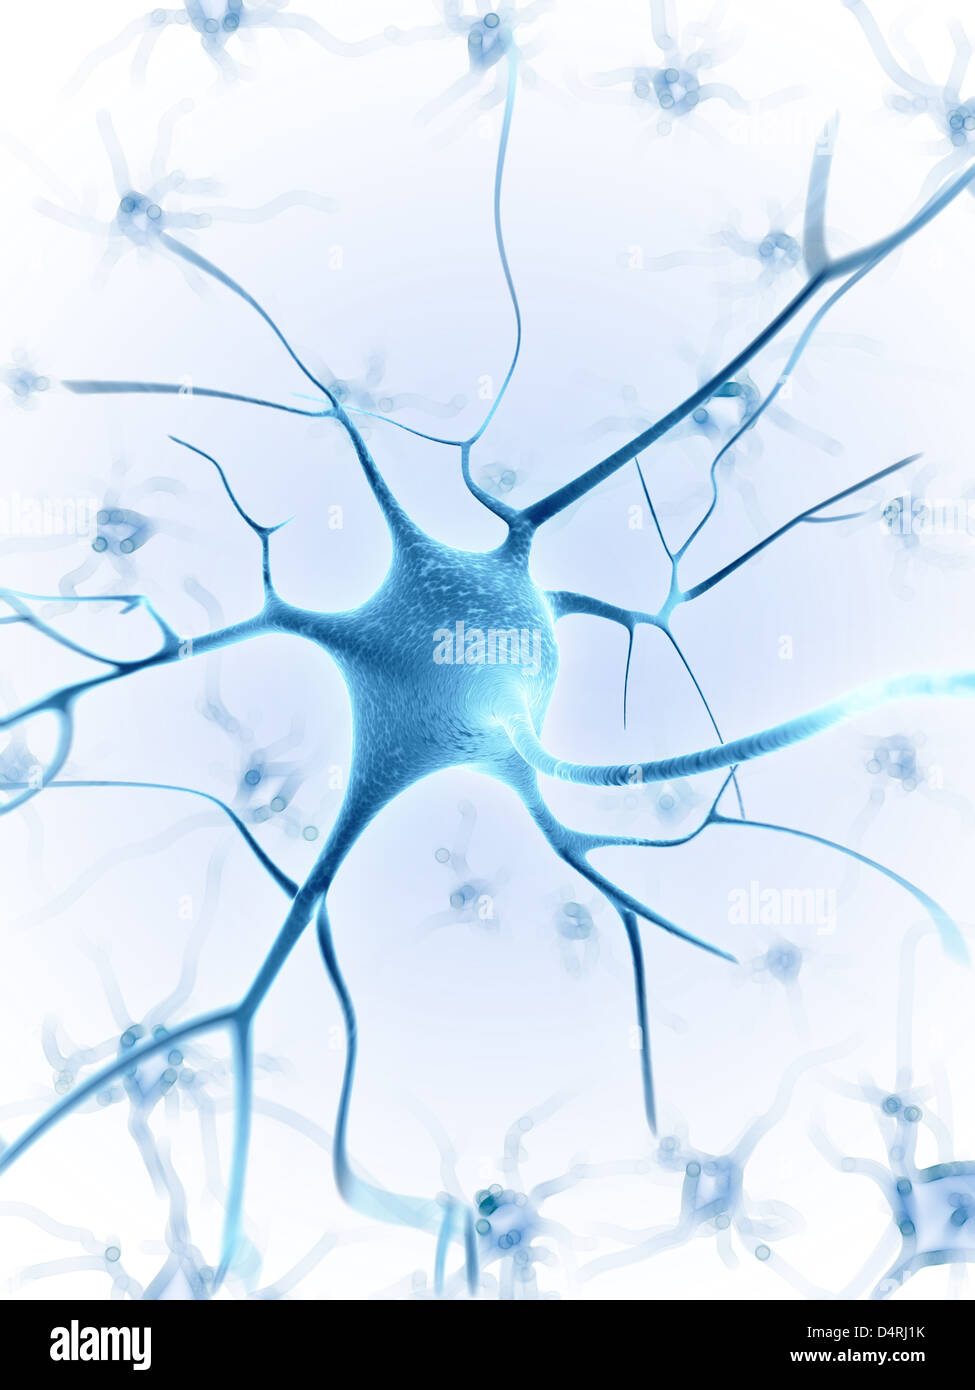 Nerve cell Stock Photo